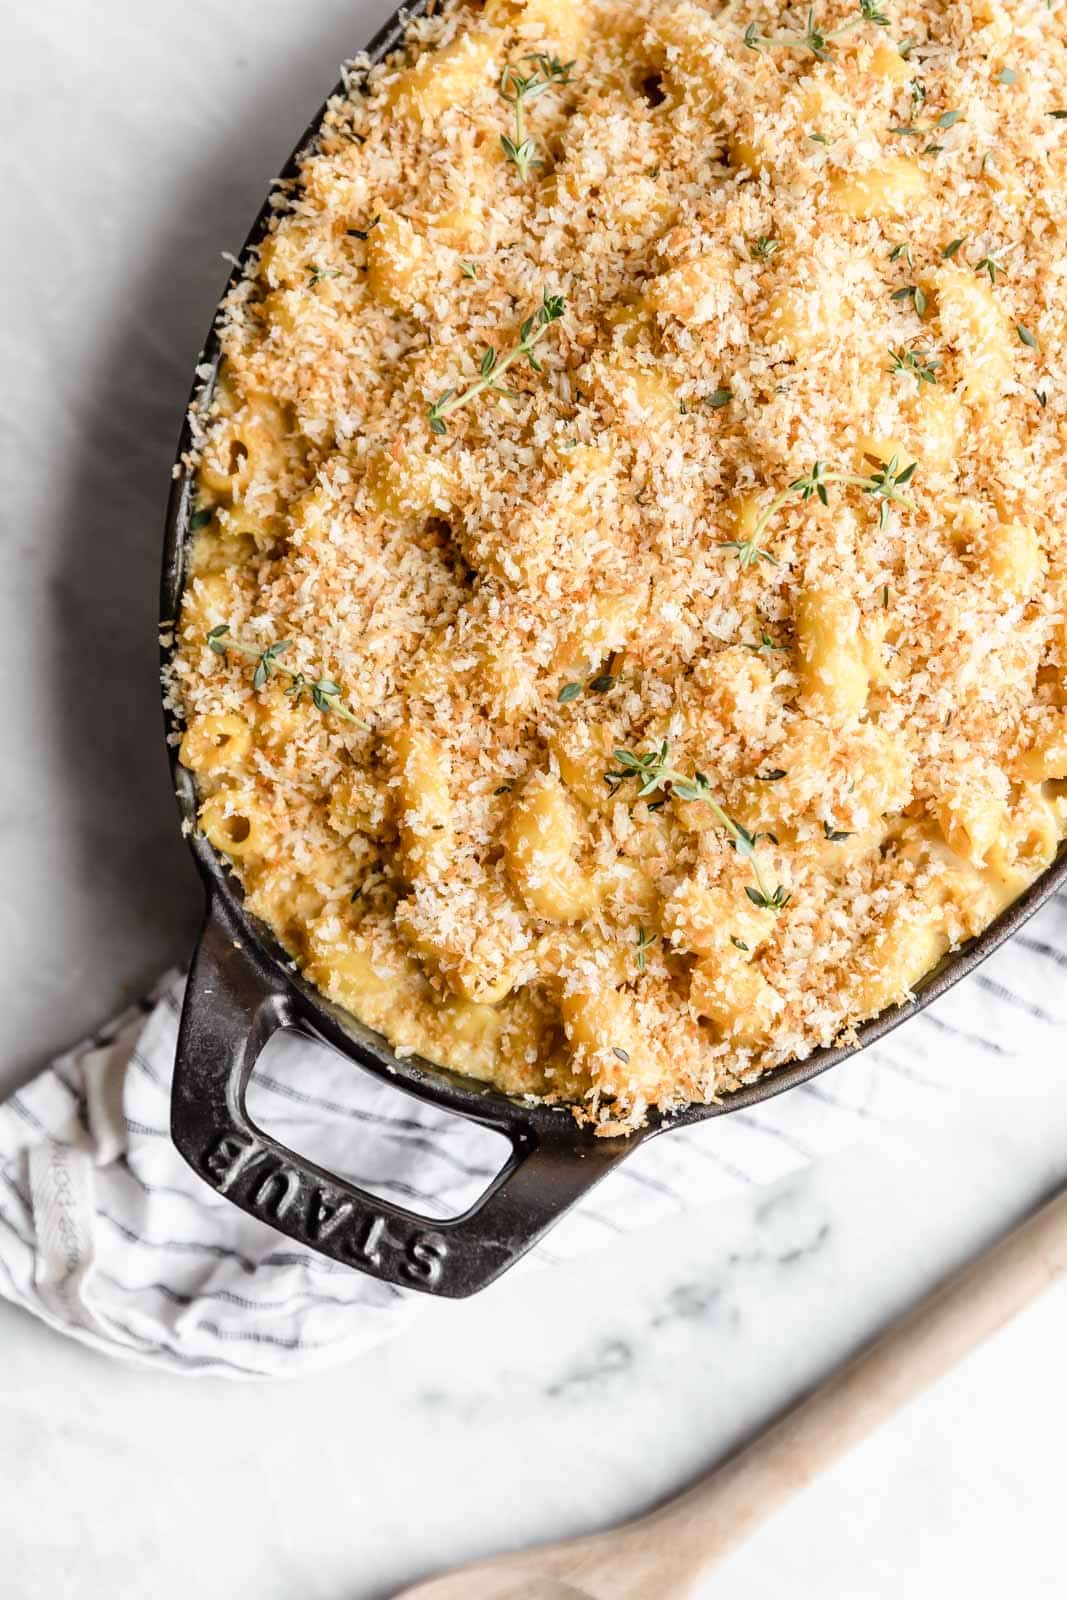 An epic Vegan Mac and Cheese that will have even the most discerning meat eaters will go crazy for! Made with a creamy cashew cheese sauce. 